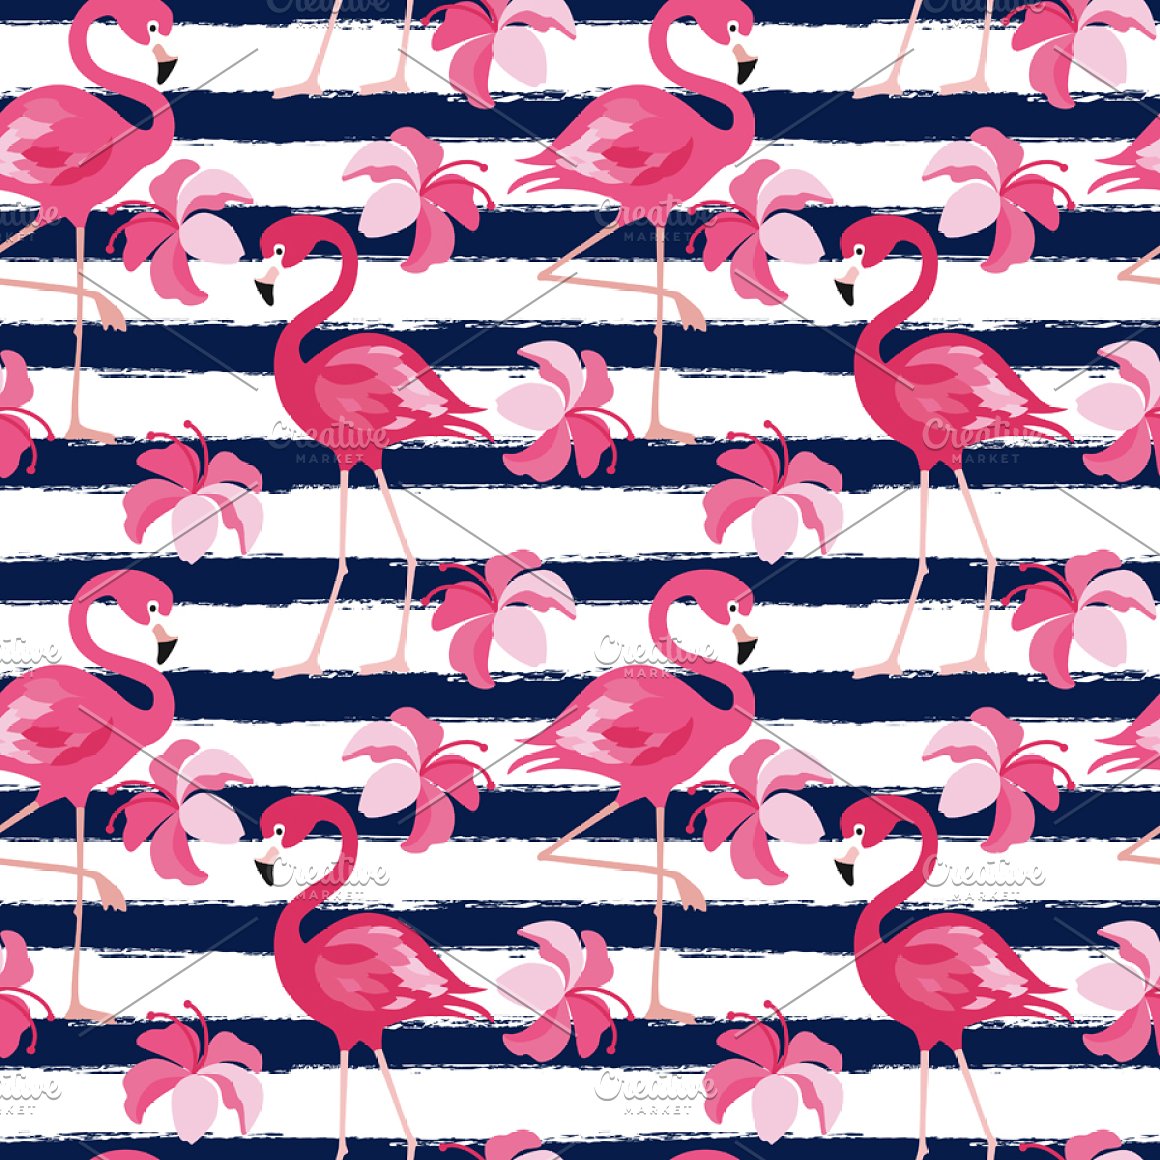 Full pink flamingo collection.